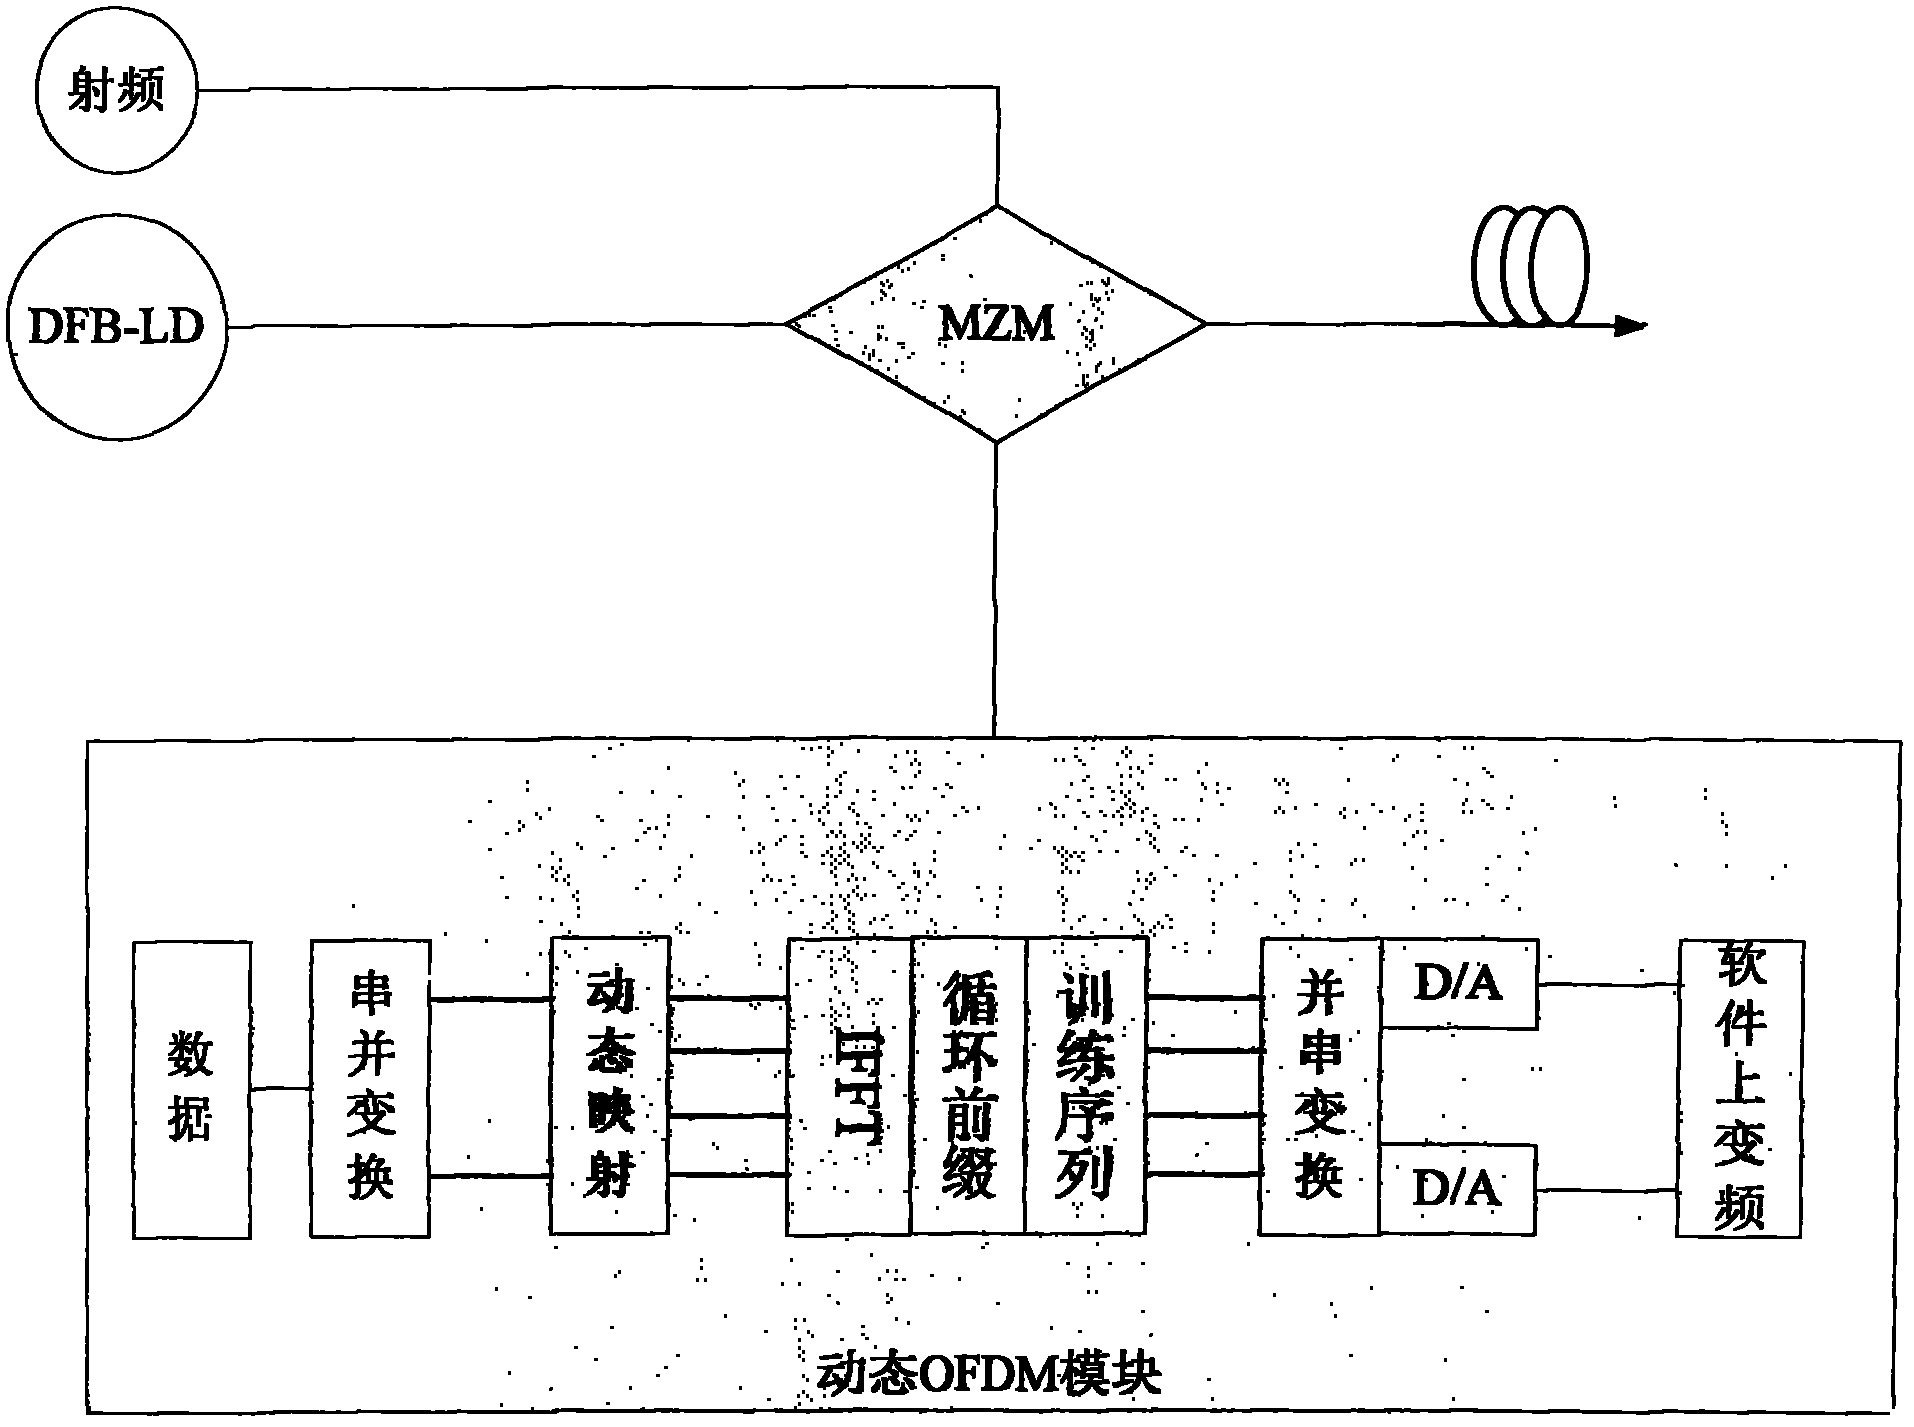 Optical orthogonal frequency division multiplexing (OFDM) dynamic allocation-based passive access network system and method